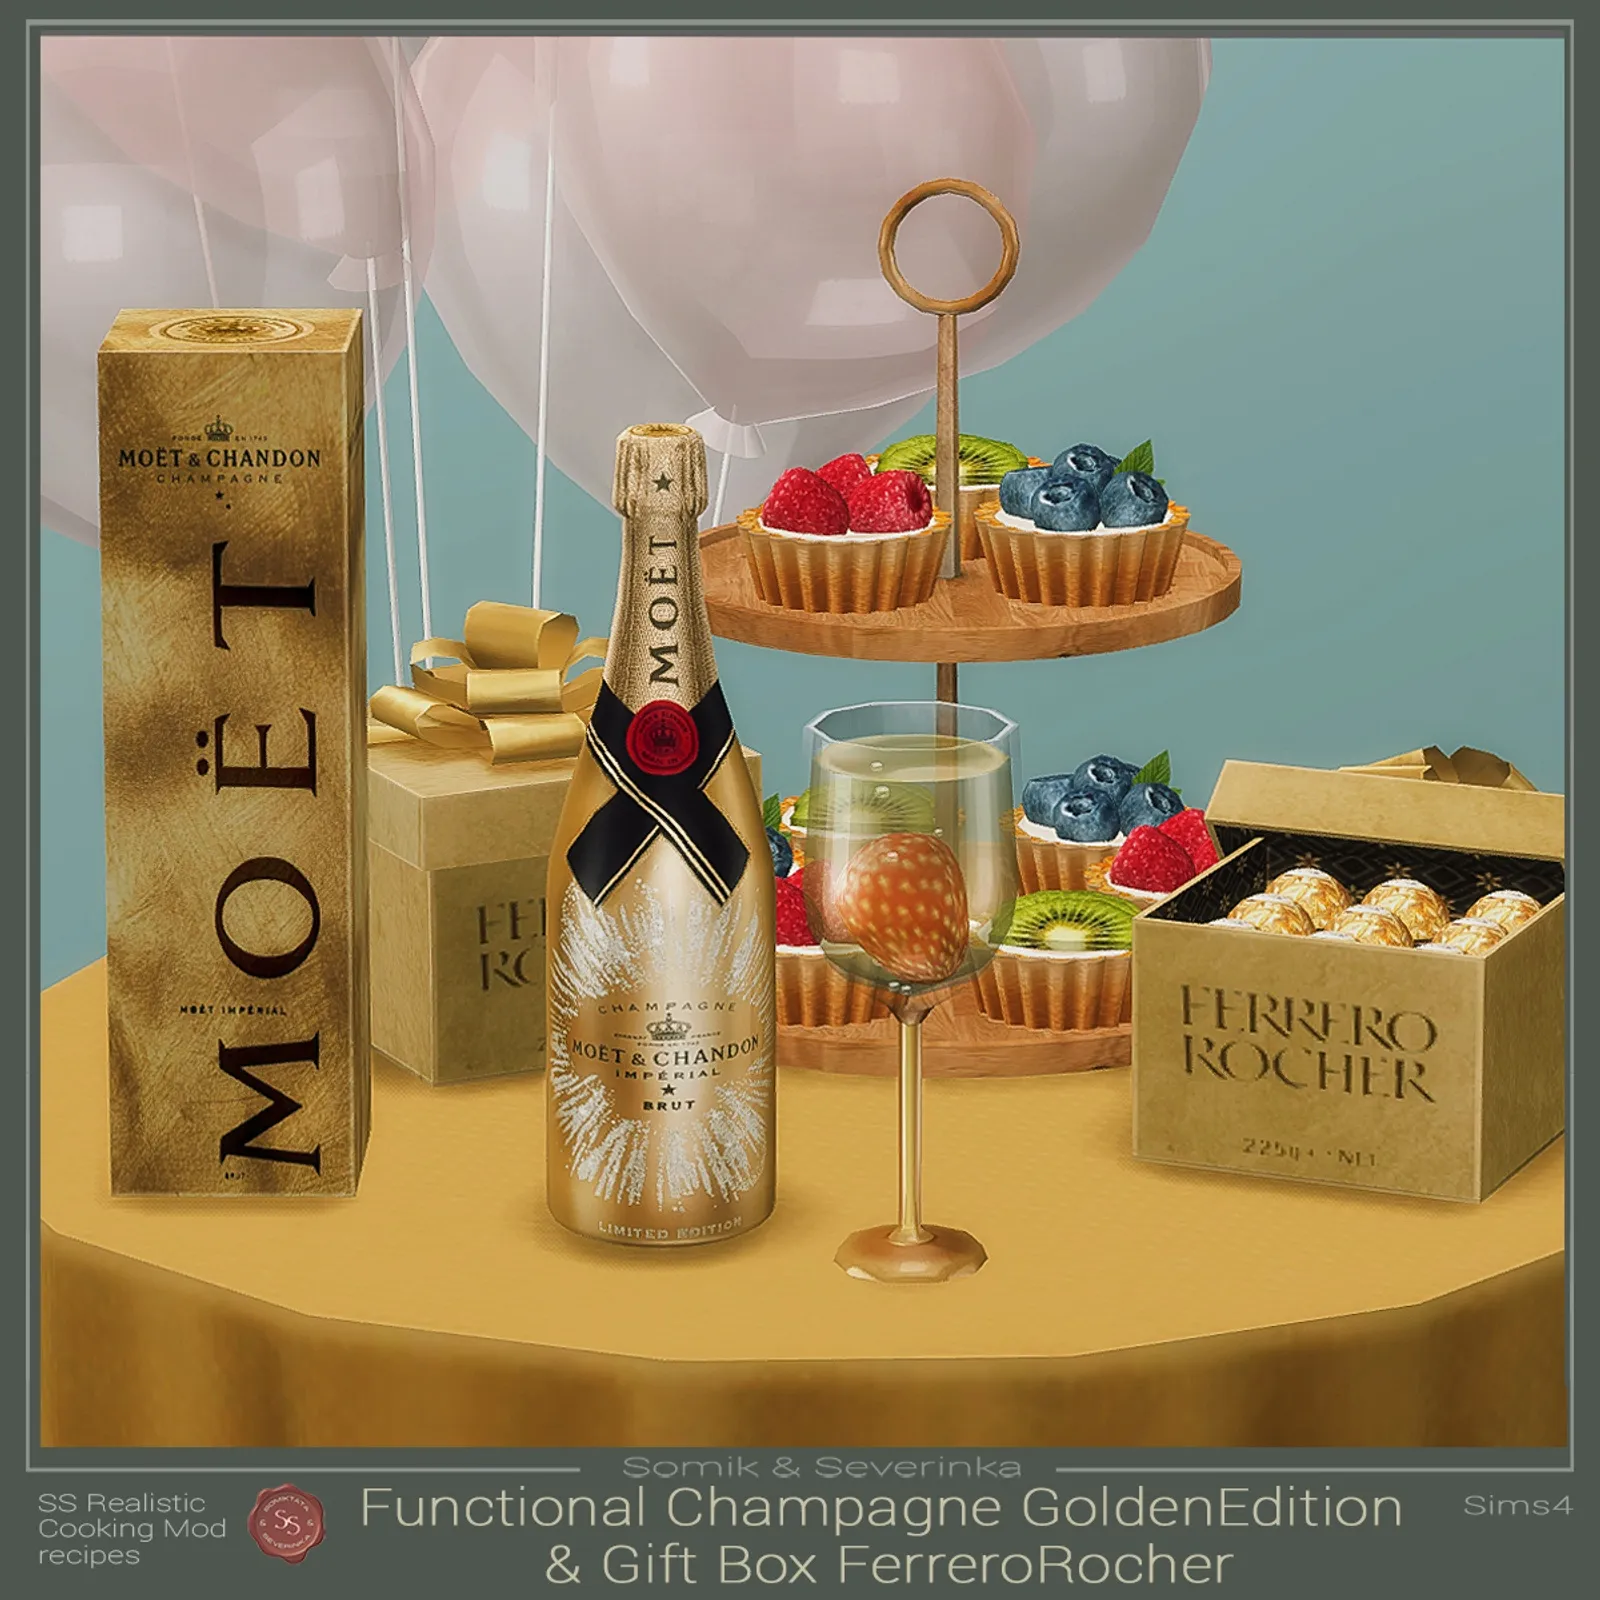 Functional Champagne "Golden Edition" and Gift Box "Ferrero Rocher"